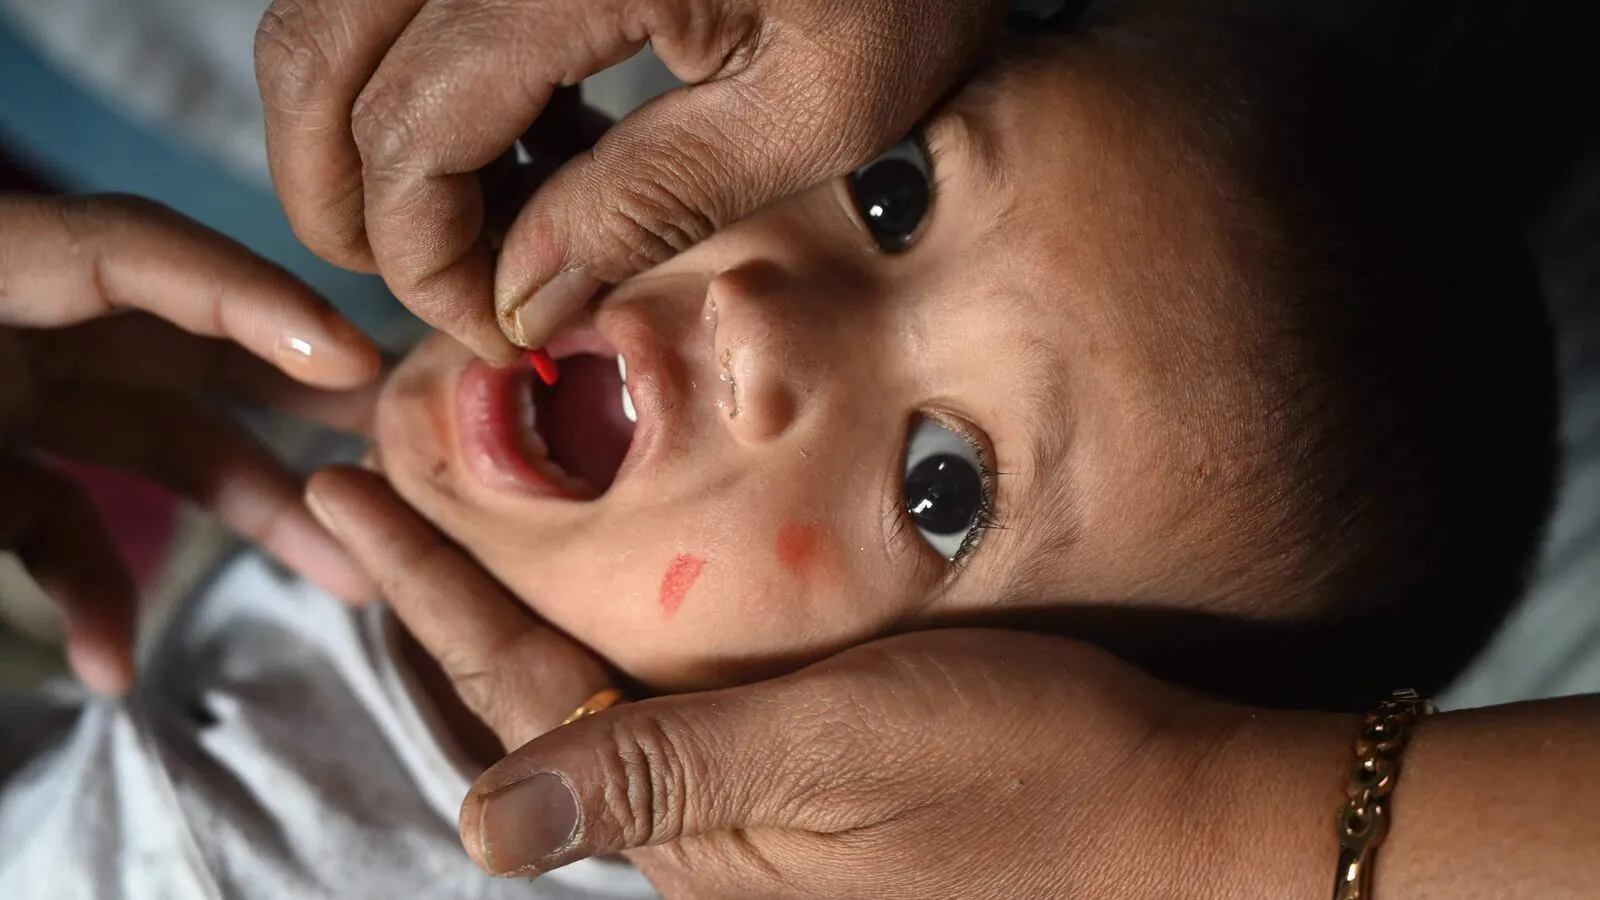 India's Measles Outbreak Exceeds 73,000 Cases